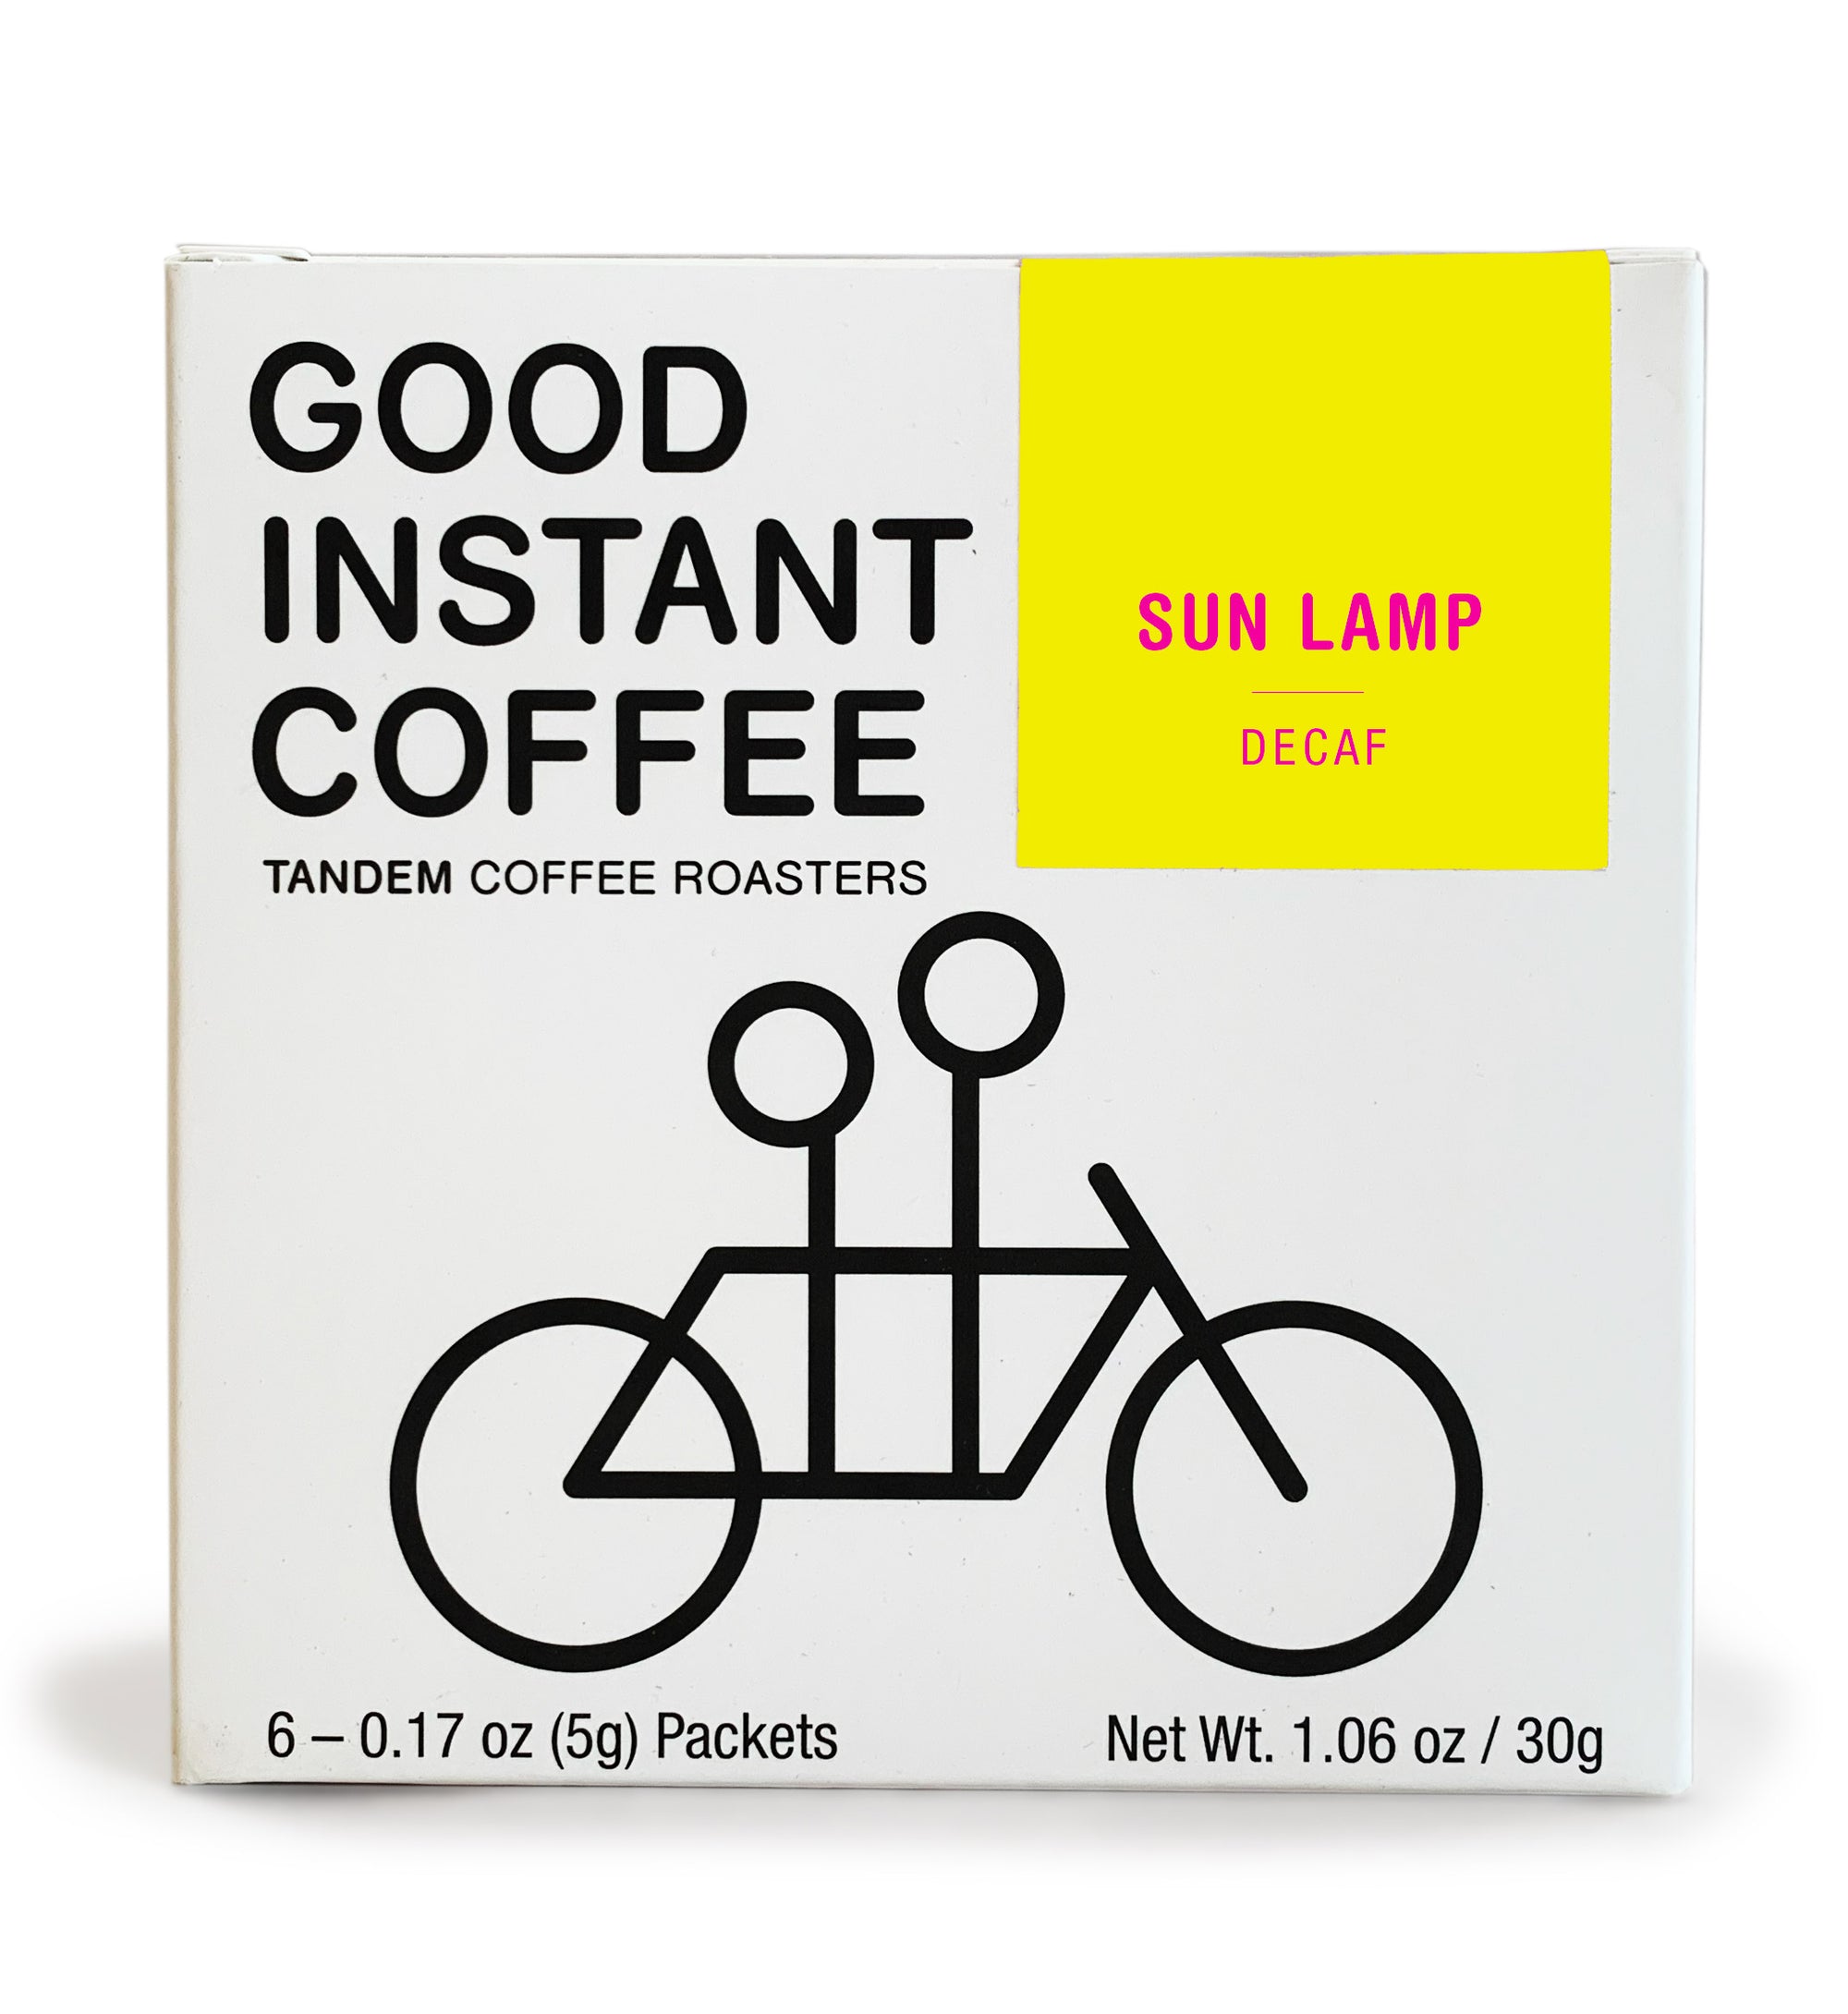 A box of good decaffeinated coffee from Tandem Coffee Roasters, featuring a graphic of a tandem bicycle. The box is labeled "Decaf" with "Sun Lamp" and lists six